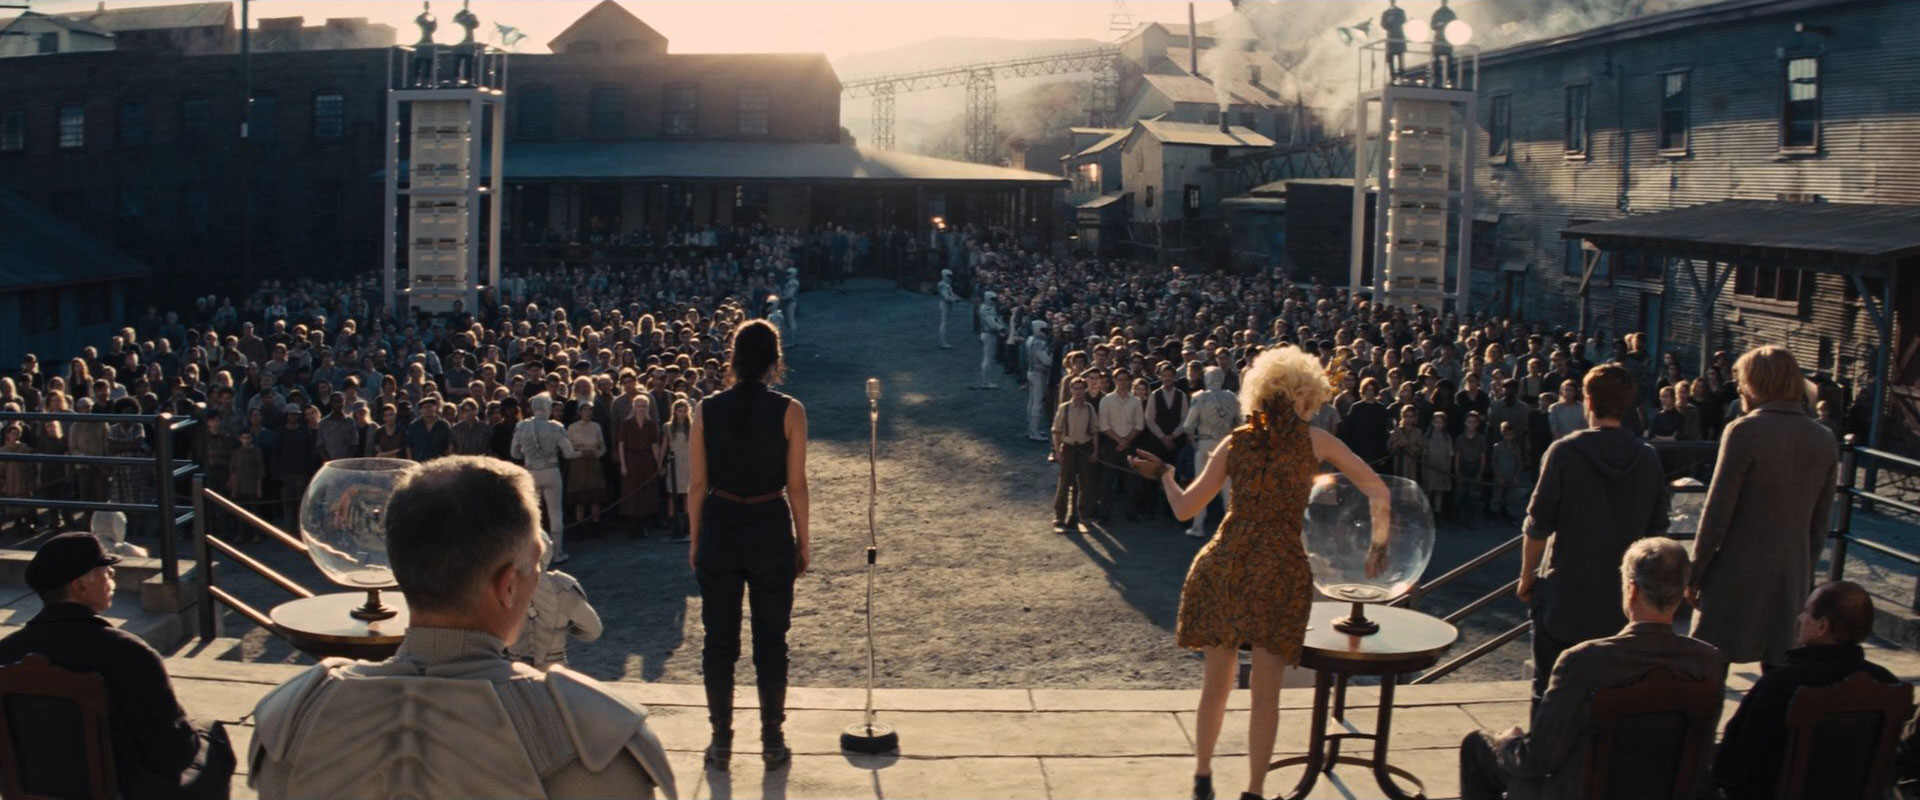 The Reaping at District 12, as depicted in The Hunger Games: Catching Fire.